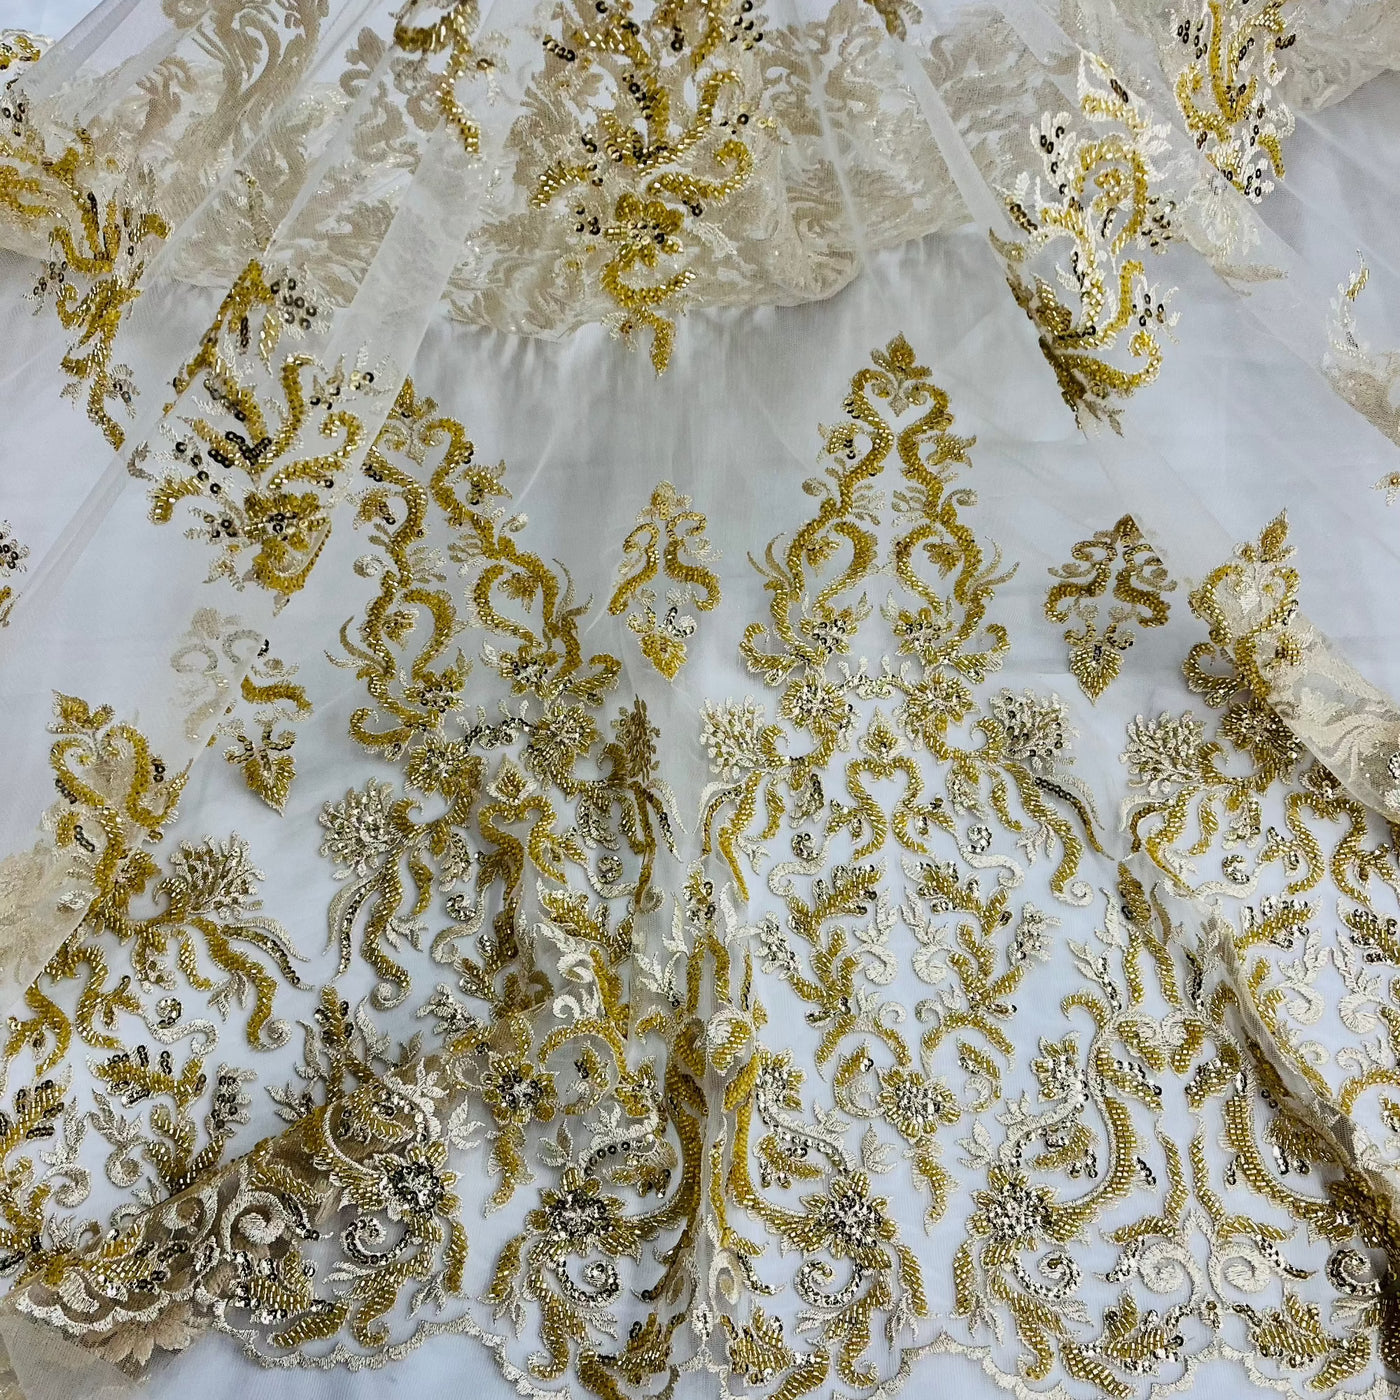 Beaded & Sequined Lace Fabric Embroidered on 100% Polyester Net Mesh | Lace USA - GD-13314 Gold